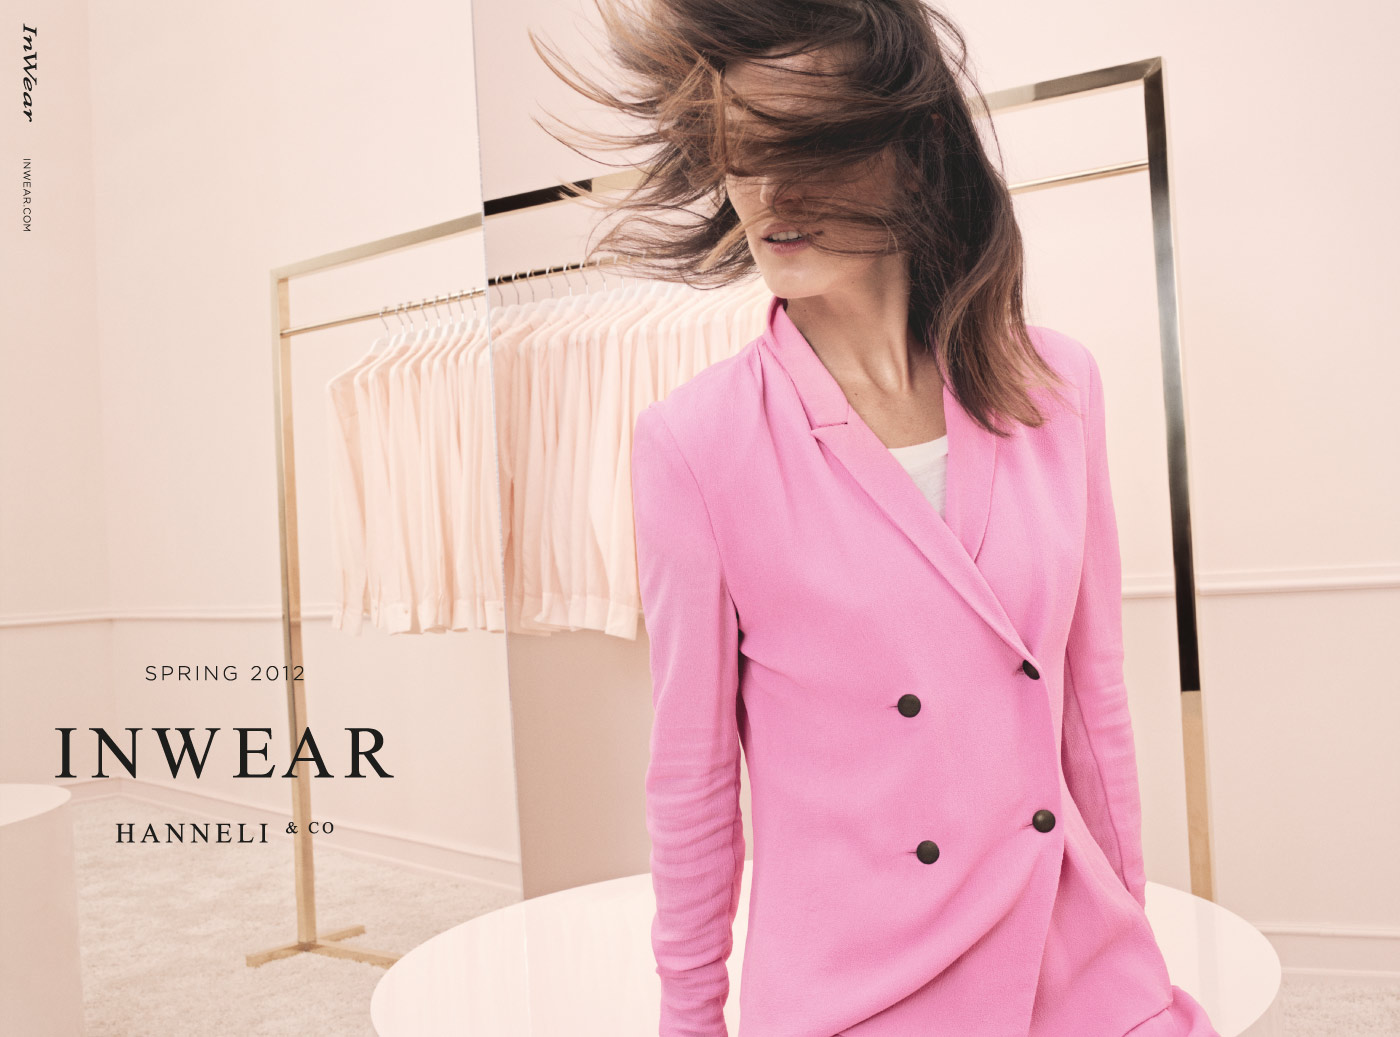 Inwear – Campaign Spring/Summer 2012